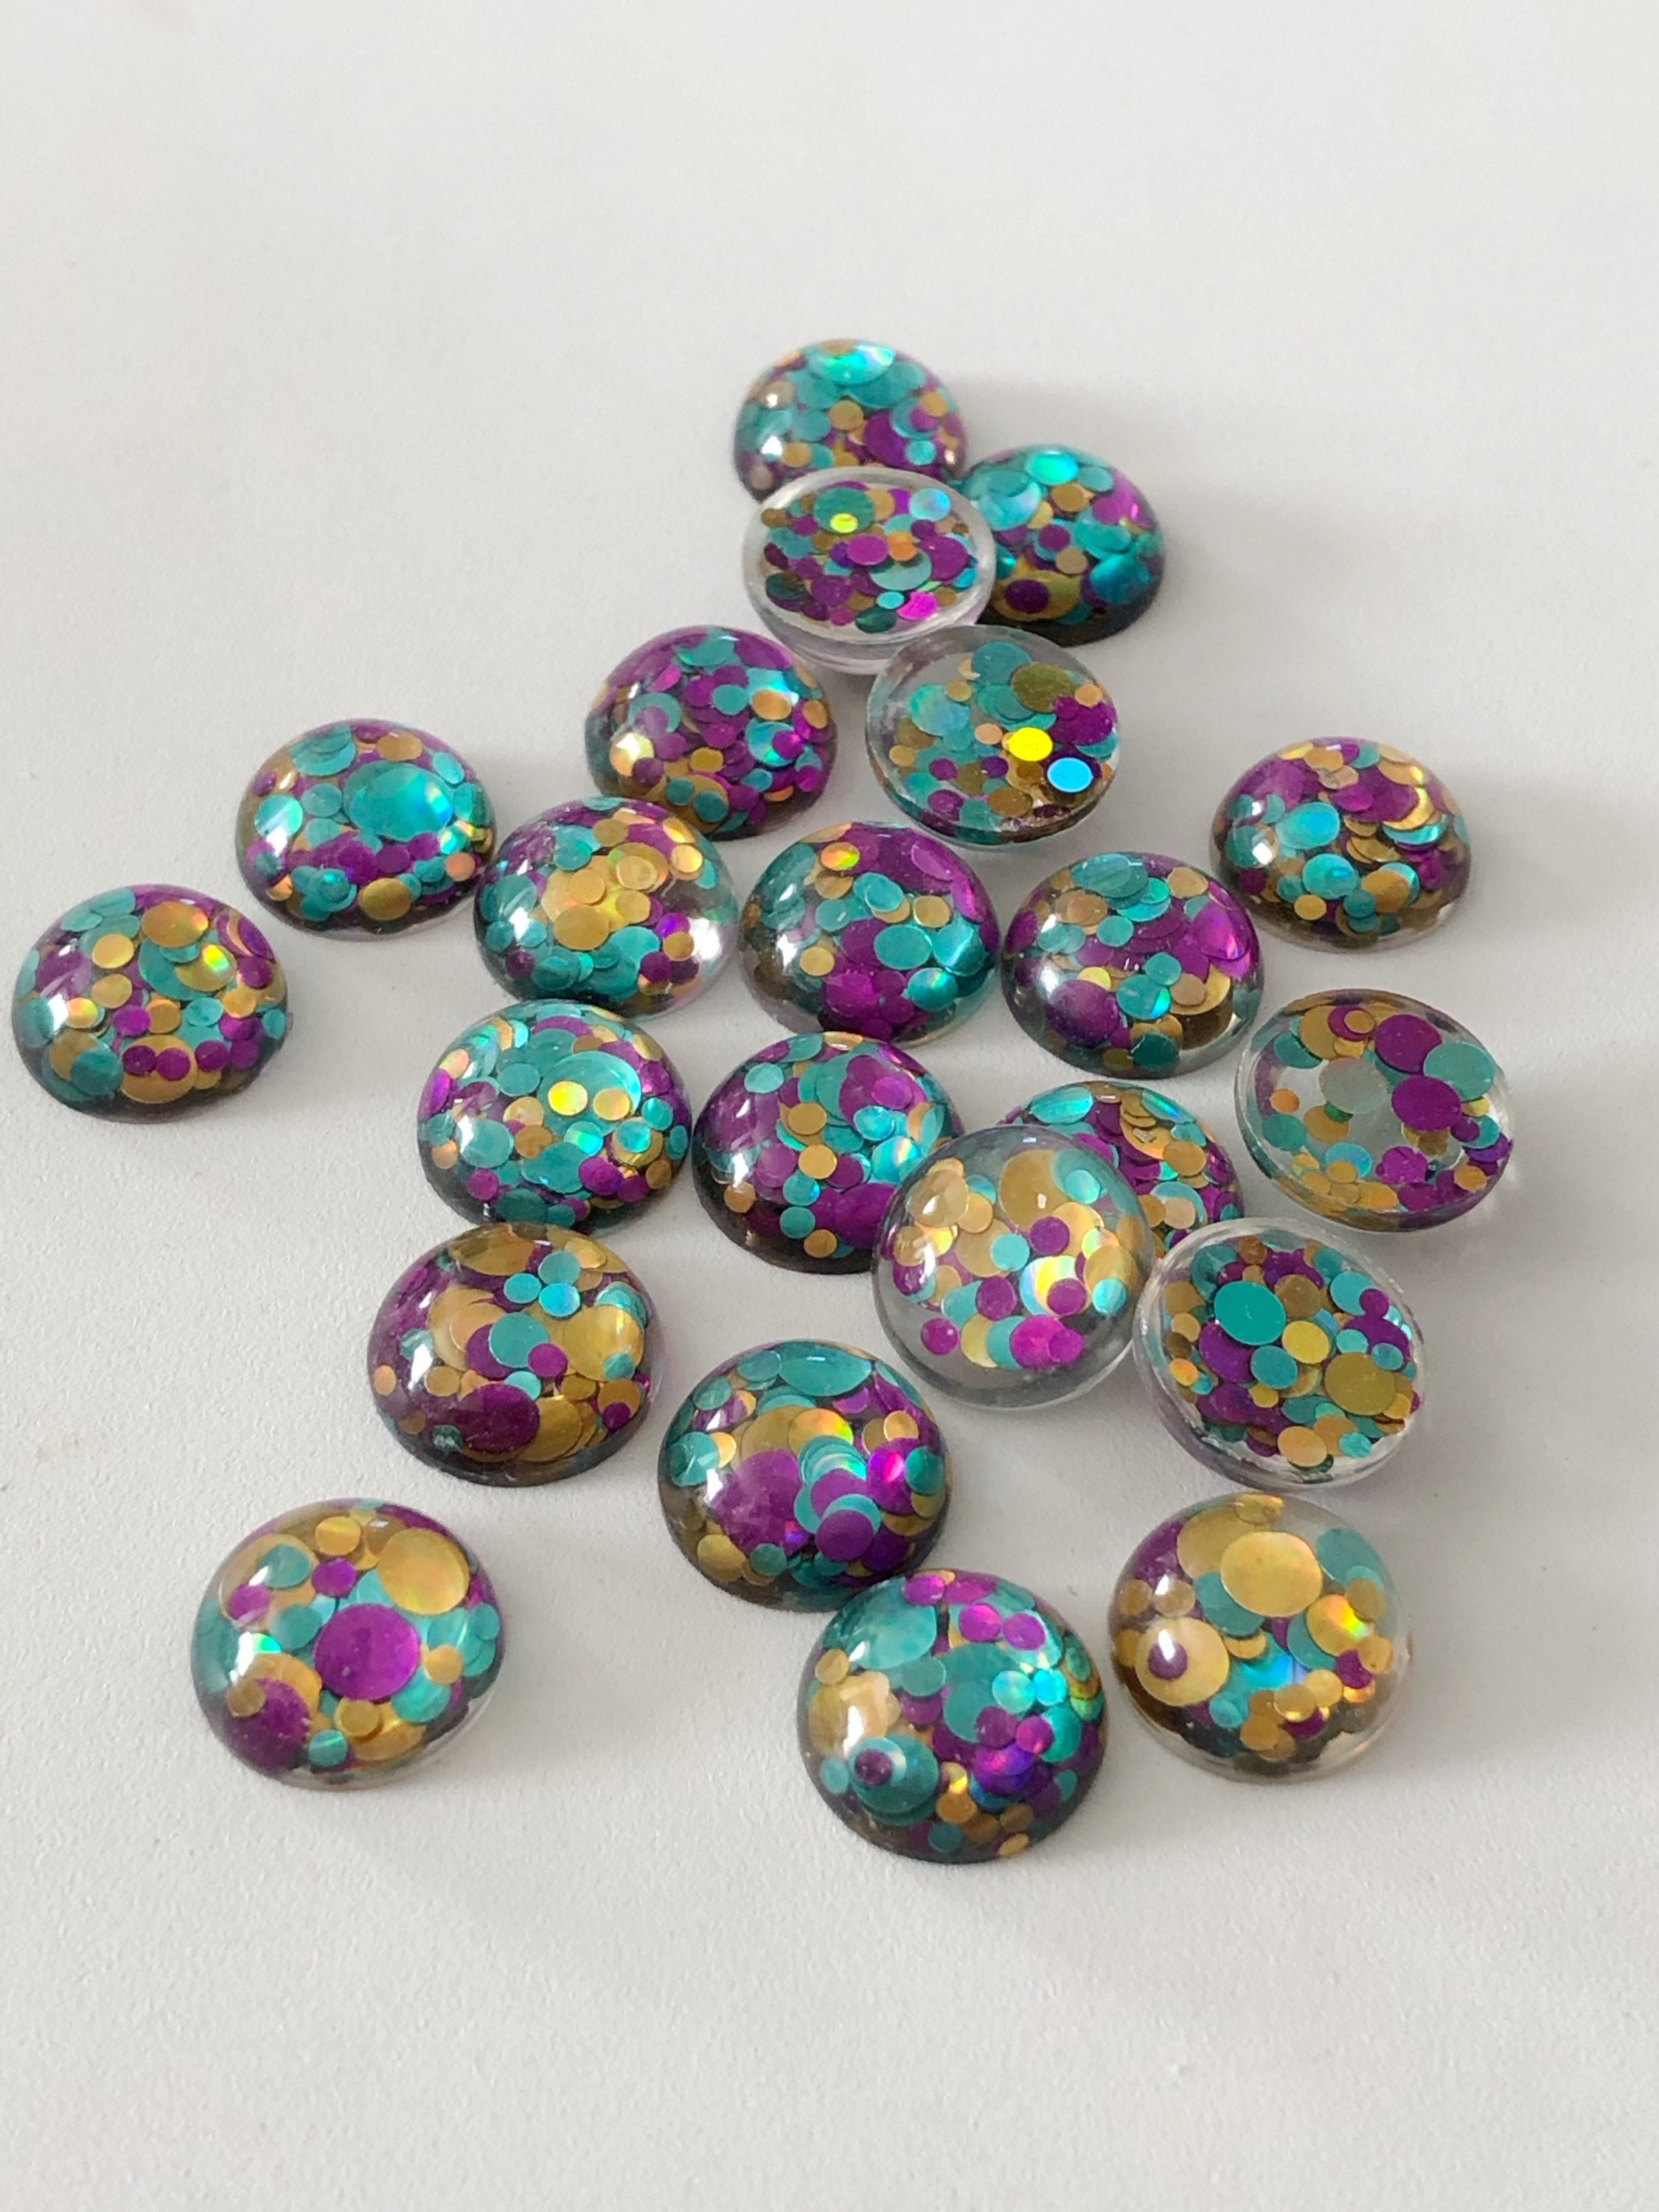 12mm Teal Purple Gold Glitter Cabochon 10 pieces Resin | Etsy